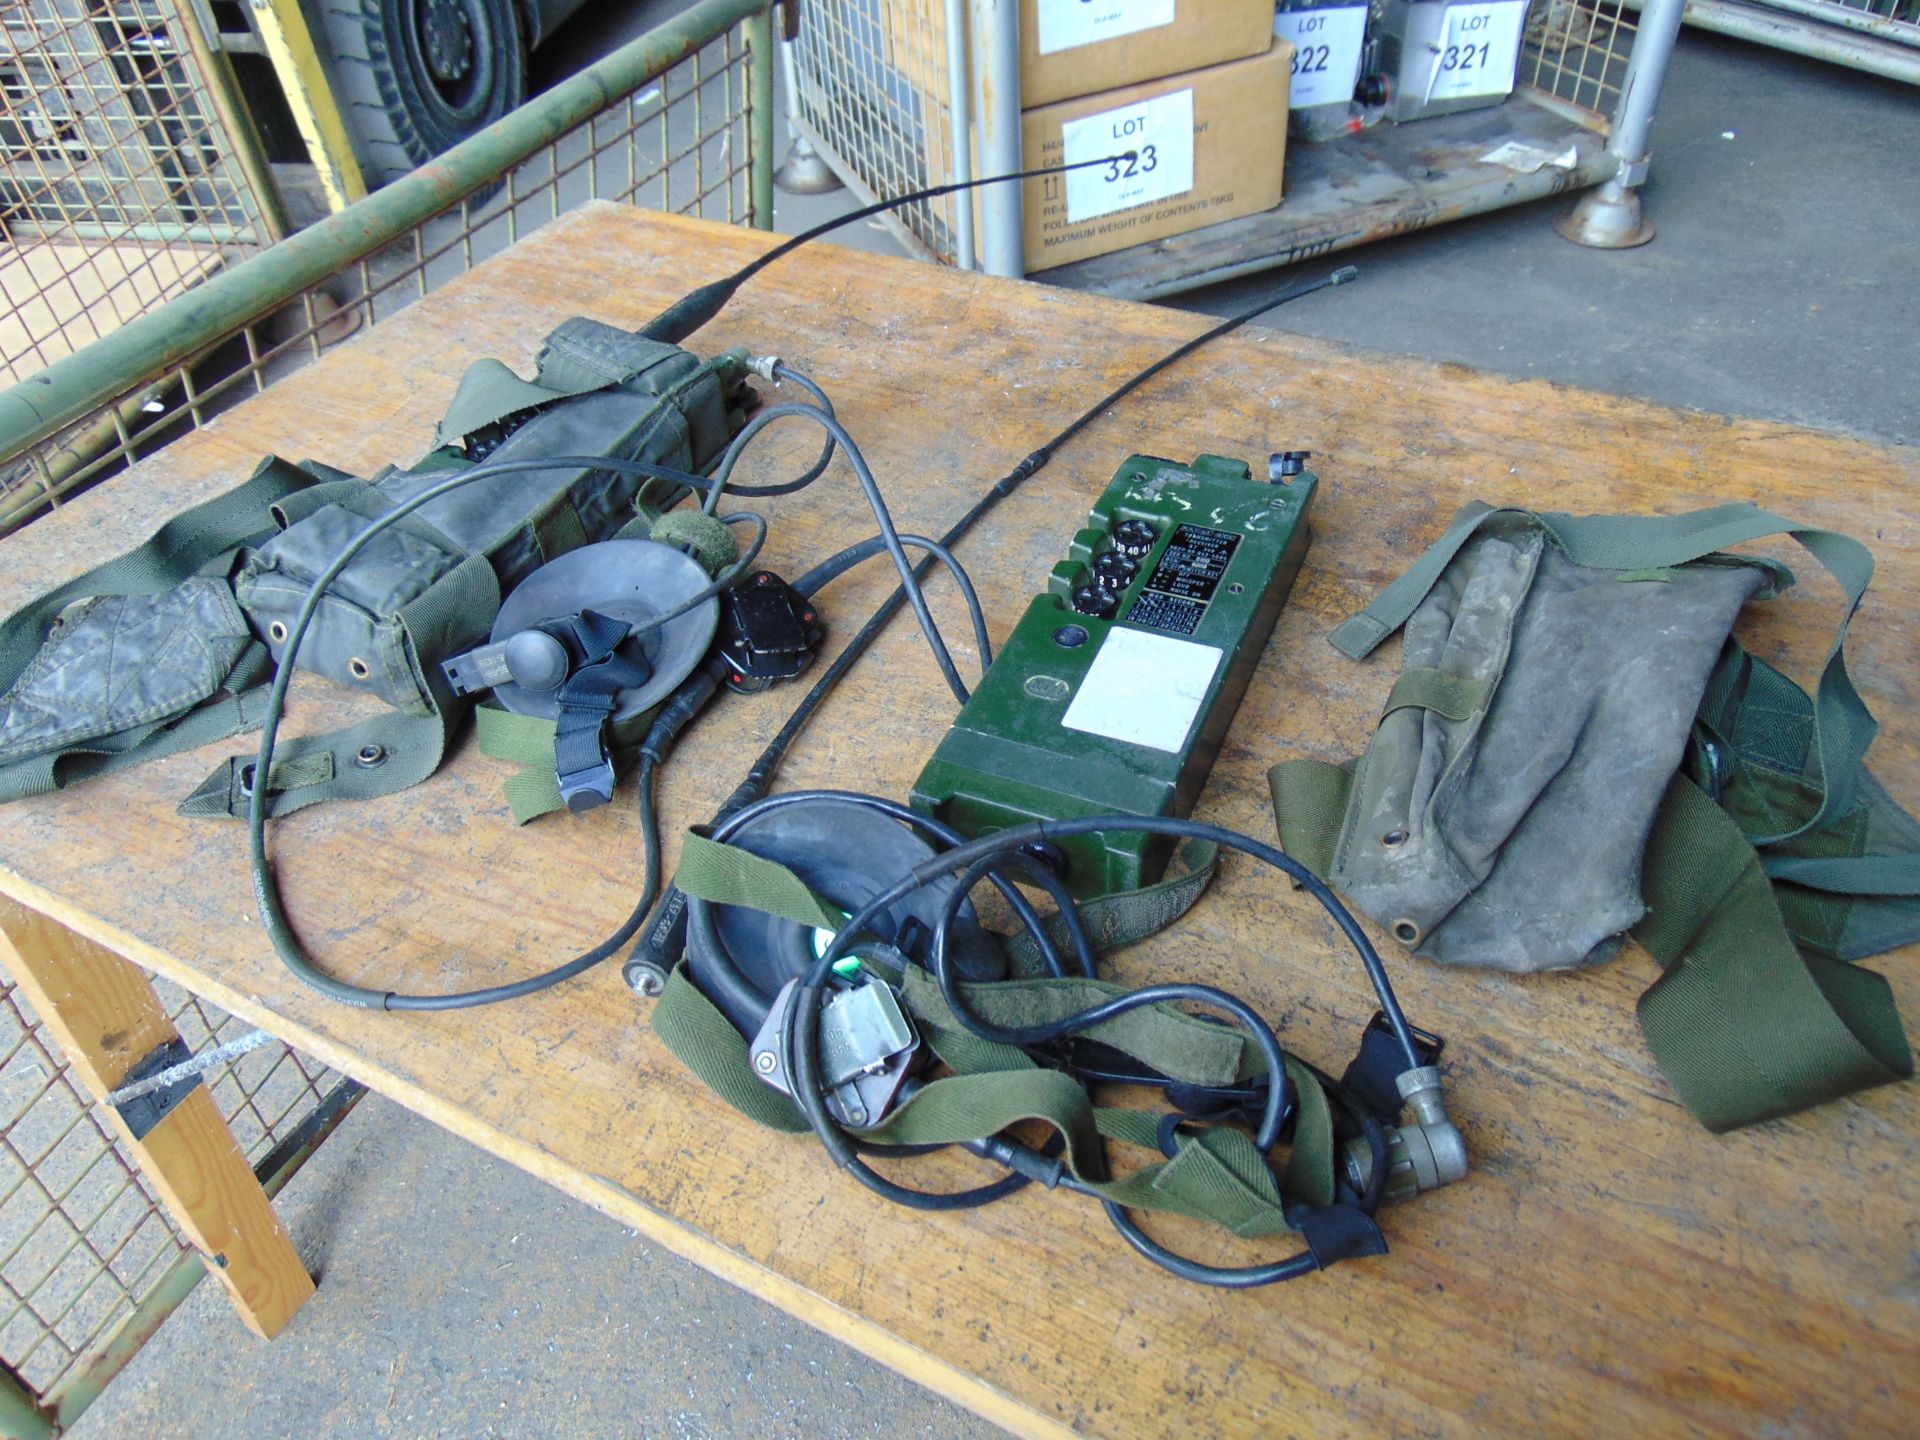 2 x RT 349 British Army Transmitter / Receiver c/w Pouch, Headset, Antenna and Battery Cassette. - Image 4 of 5